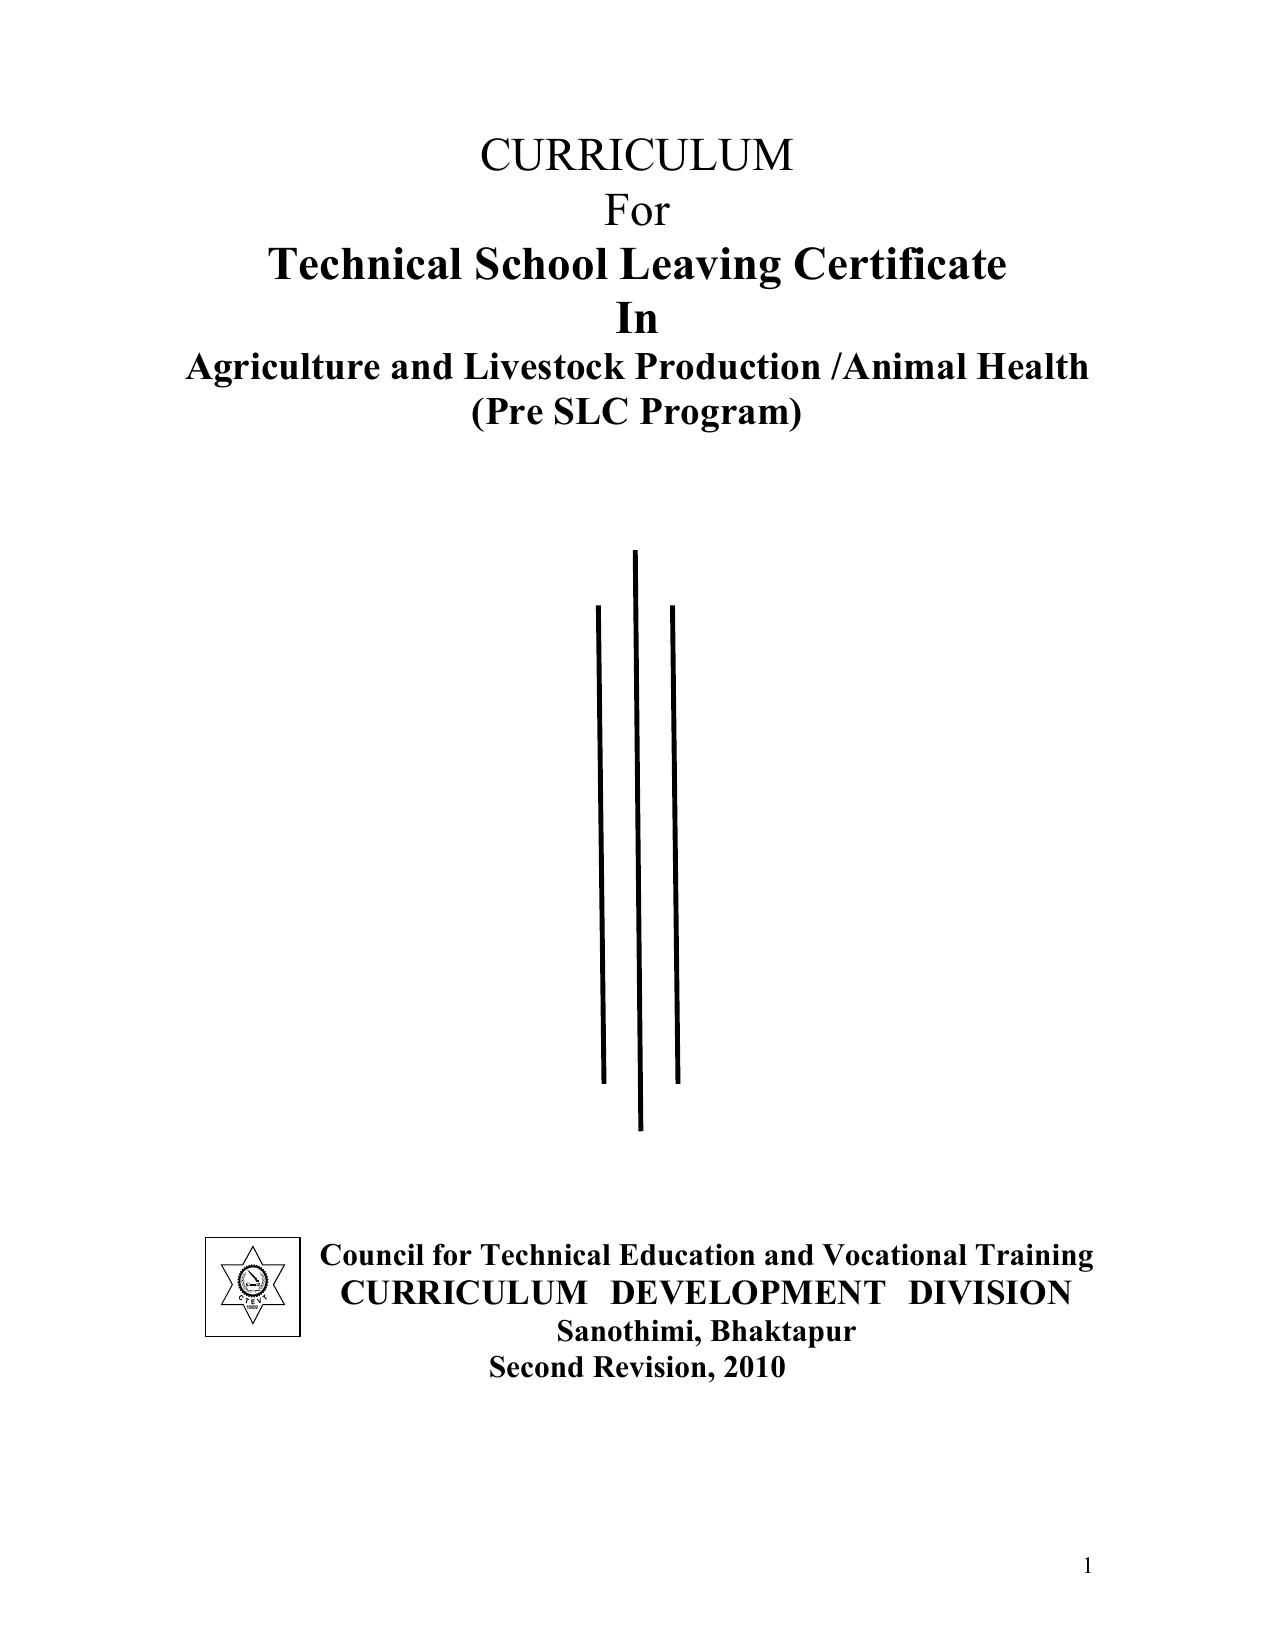 TSLC in Agriculture livestock Production Animal Science 2 year Pre SLC, 2010